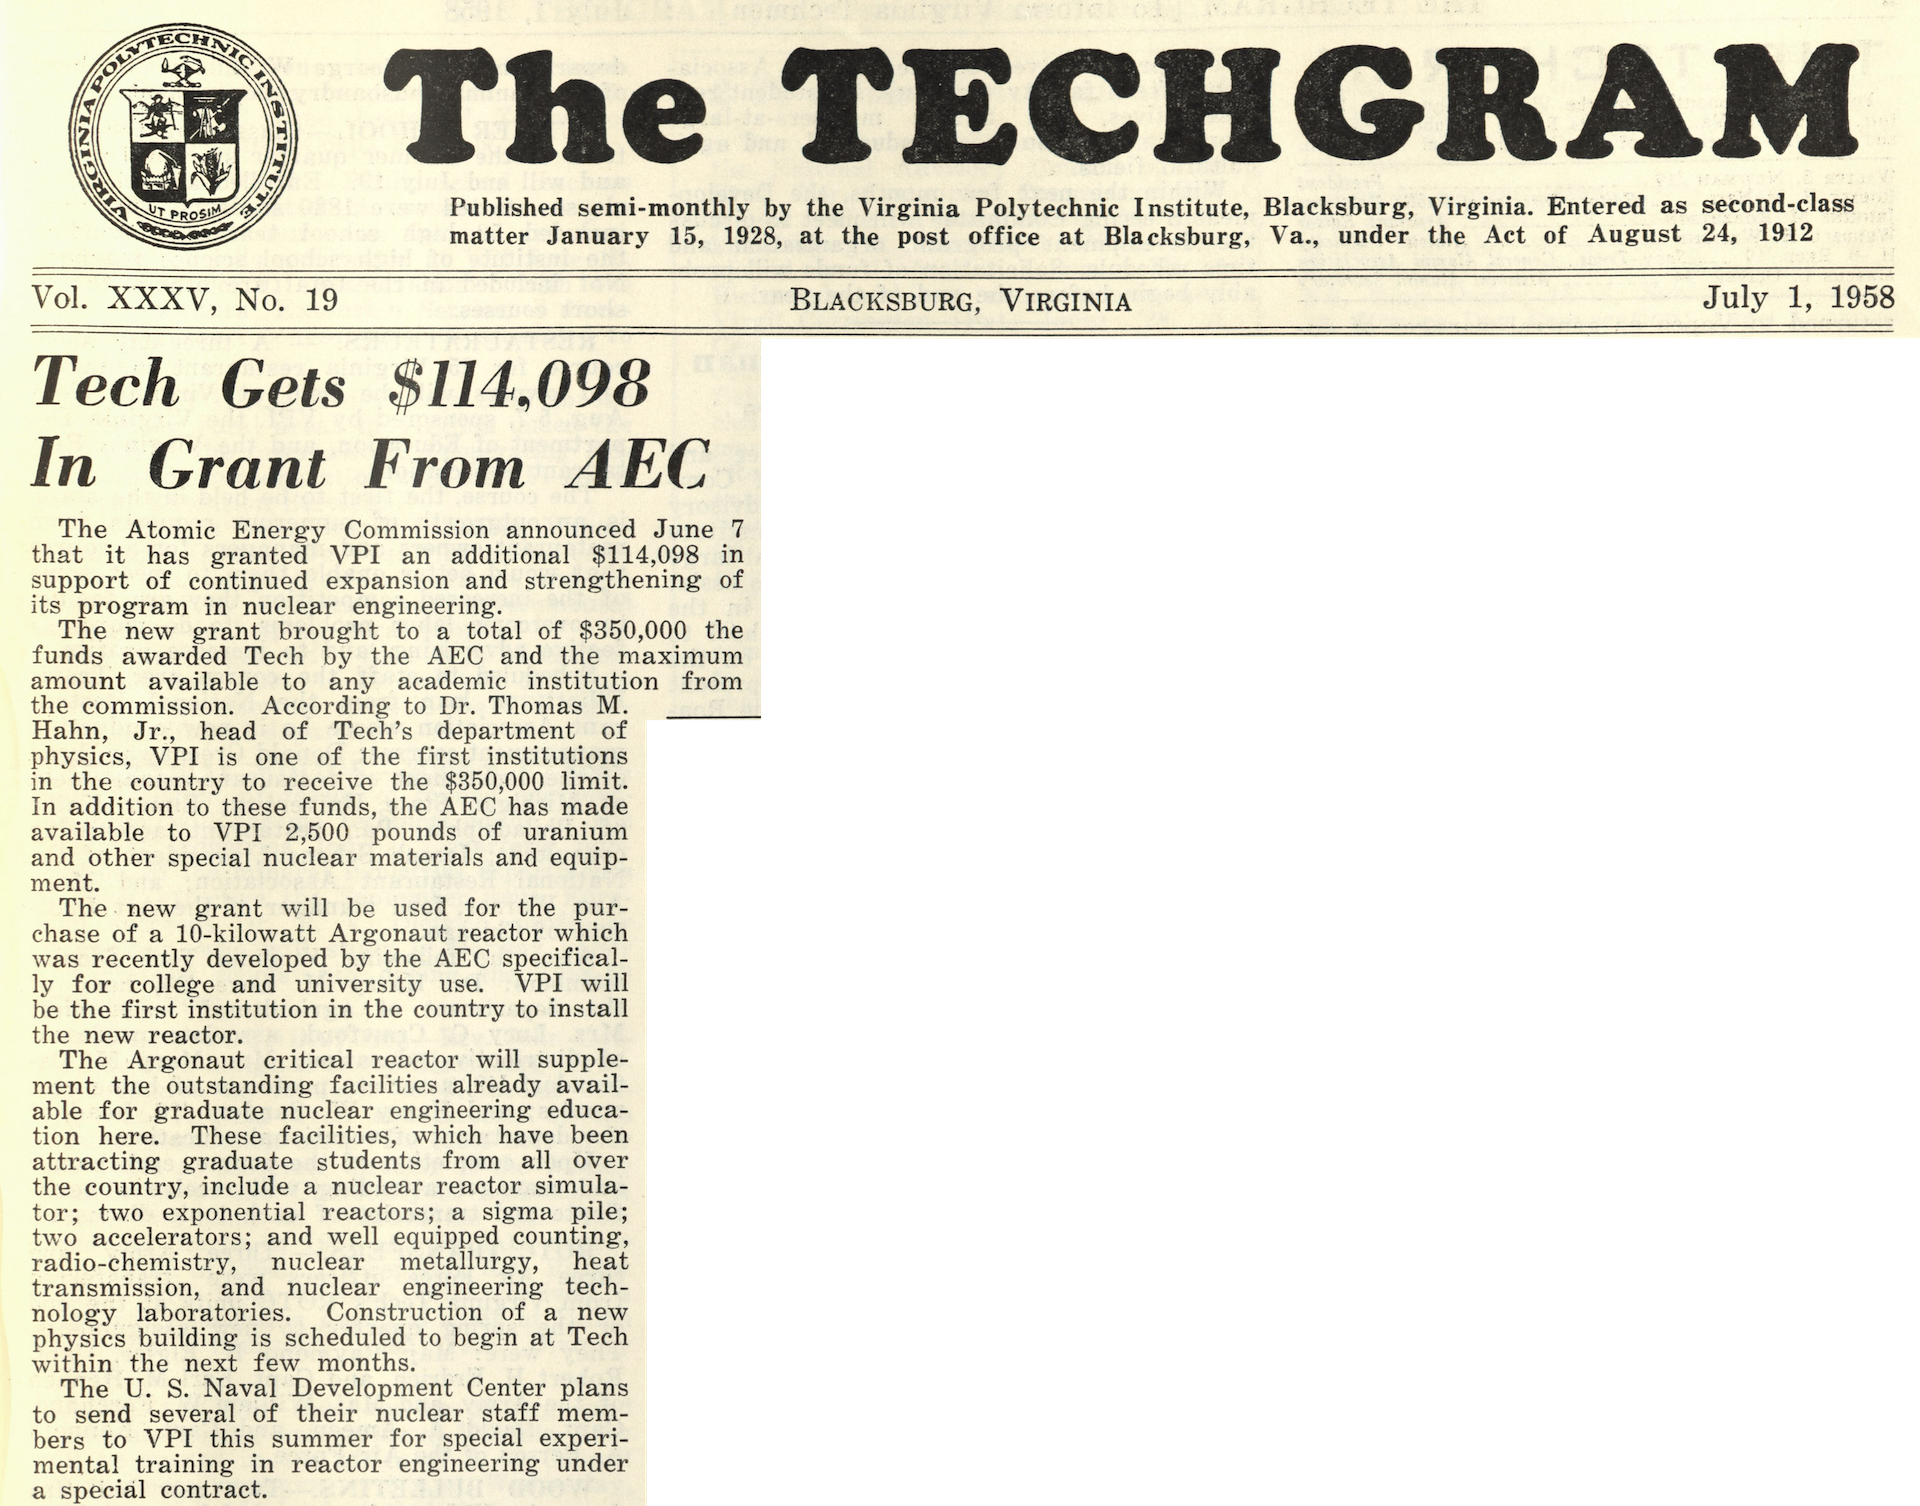 The TECHGRAM Vol. XXXV, No. 19  July 1, 1958  Tech Gets $114,098 In Grant From AEC  The Atomic Energy Commission announced June 7 that it has granted VPI an additional $114,098 in support of continued expansion and strengthening of its program in nuclear engineering.  The new grant brought to a total of $350,000 the funds awarded Tech by the AEC and the maximum amount available to any academic institution from the commission. According to Dr. Thomas M. Hahn, Jr., head of Tech's department of physics, VPI is one of the first institutions in the country to receive the $350,000 limit. In addition to these funds, the AEC has made available to VPI 2,500 pounds of uranium and other special nuclear materials and equipment.   The new grant will be used for the pur- chase of a 10-kilowatt Argonaut reactor which was recently developed by the AEC specifical- ly for college and university use. VPI will be the first institution in the country to install the new reactor.  The Argonaut critical reactor will supplement the outstanding facilities already available for graduate nuclear engineering education here. These facilities, which have been attracting graduate students from all over the country, include a nuclear reactor simulator; two exponential reactors; a sigma pile; two accelerators; and well equipped counting, radio-chemistry, nuclear metallurgy, heat transmission, and nuclear engineering technology laboratories. Construction of a new physics building is scheduled to begin at Tech within the next few months.  The U. S. Naval Development Center plans to send several of their nuclear staff members to VPI this summer for special experimental training in reactor engineering under a special contract.